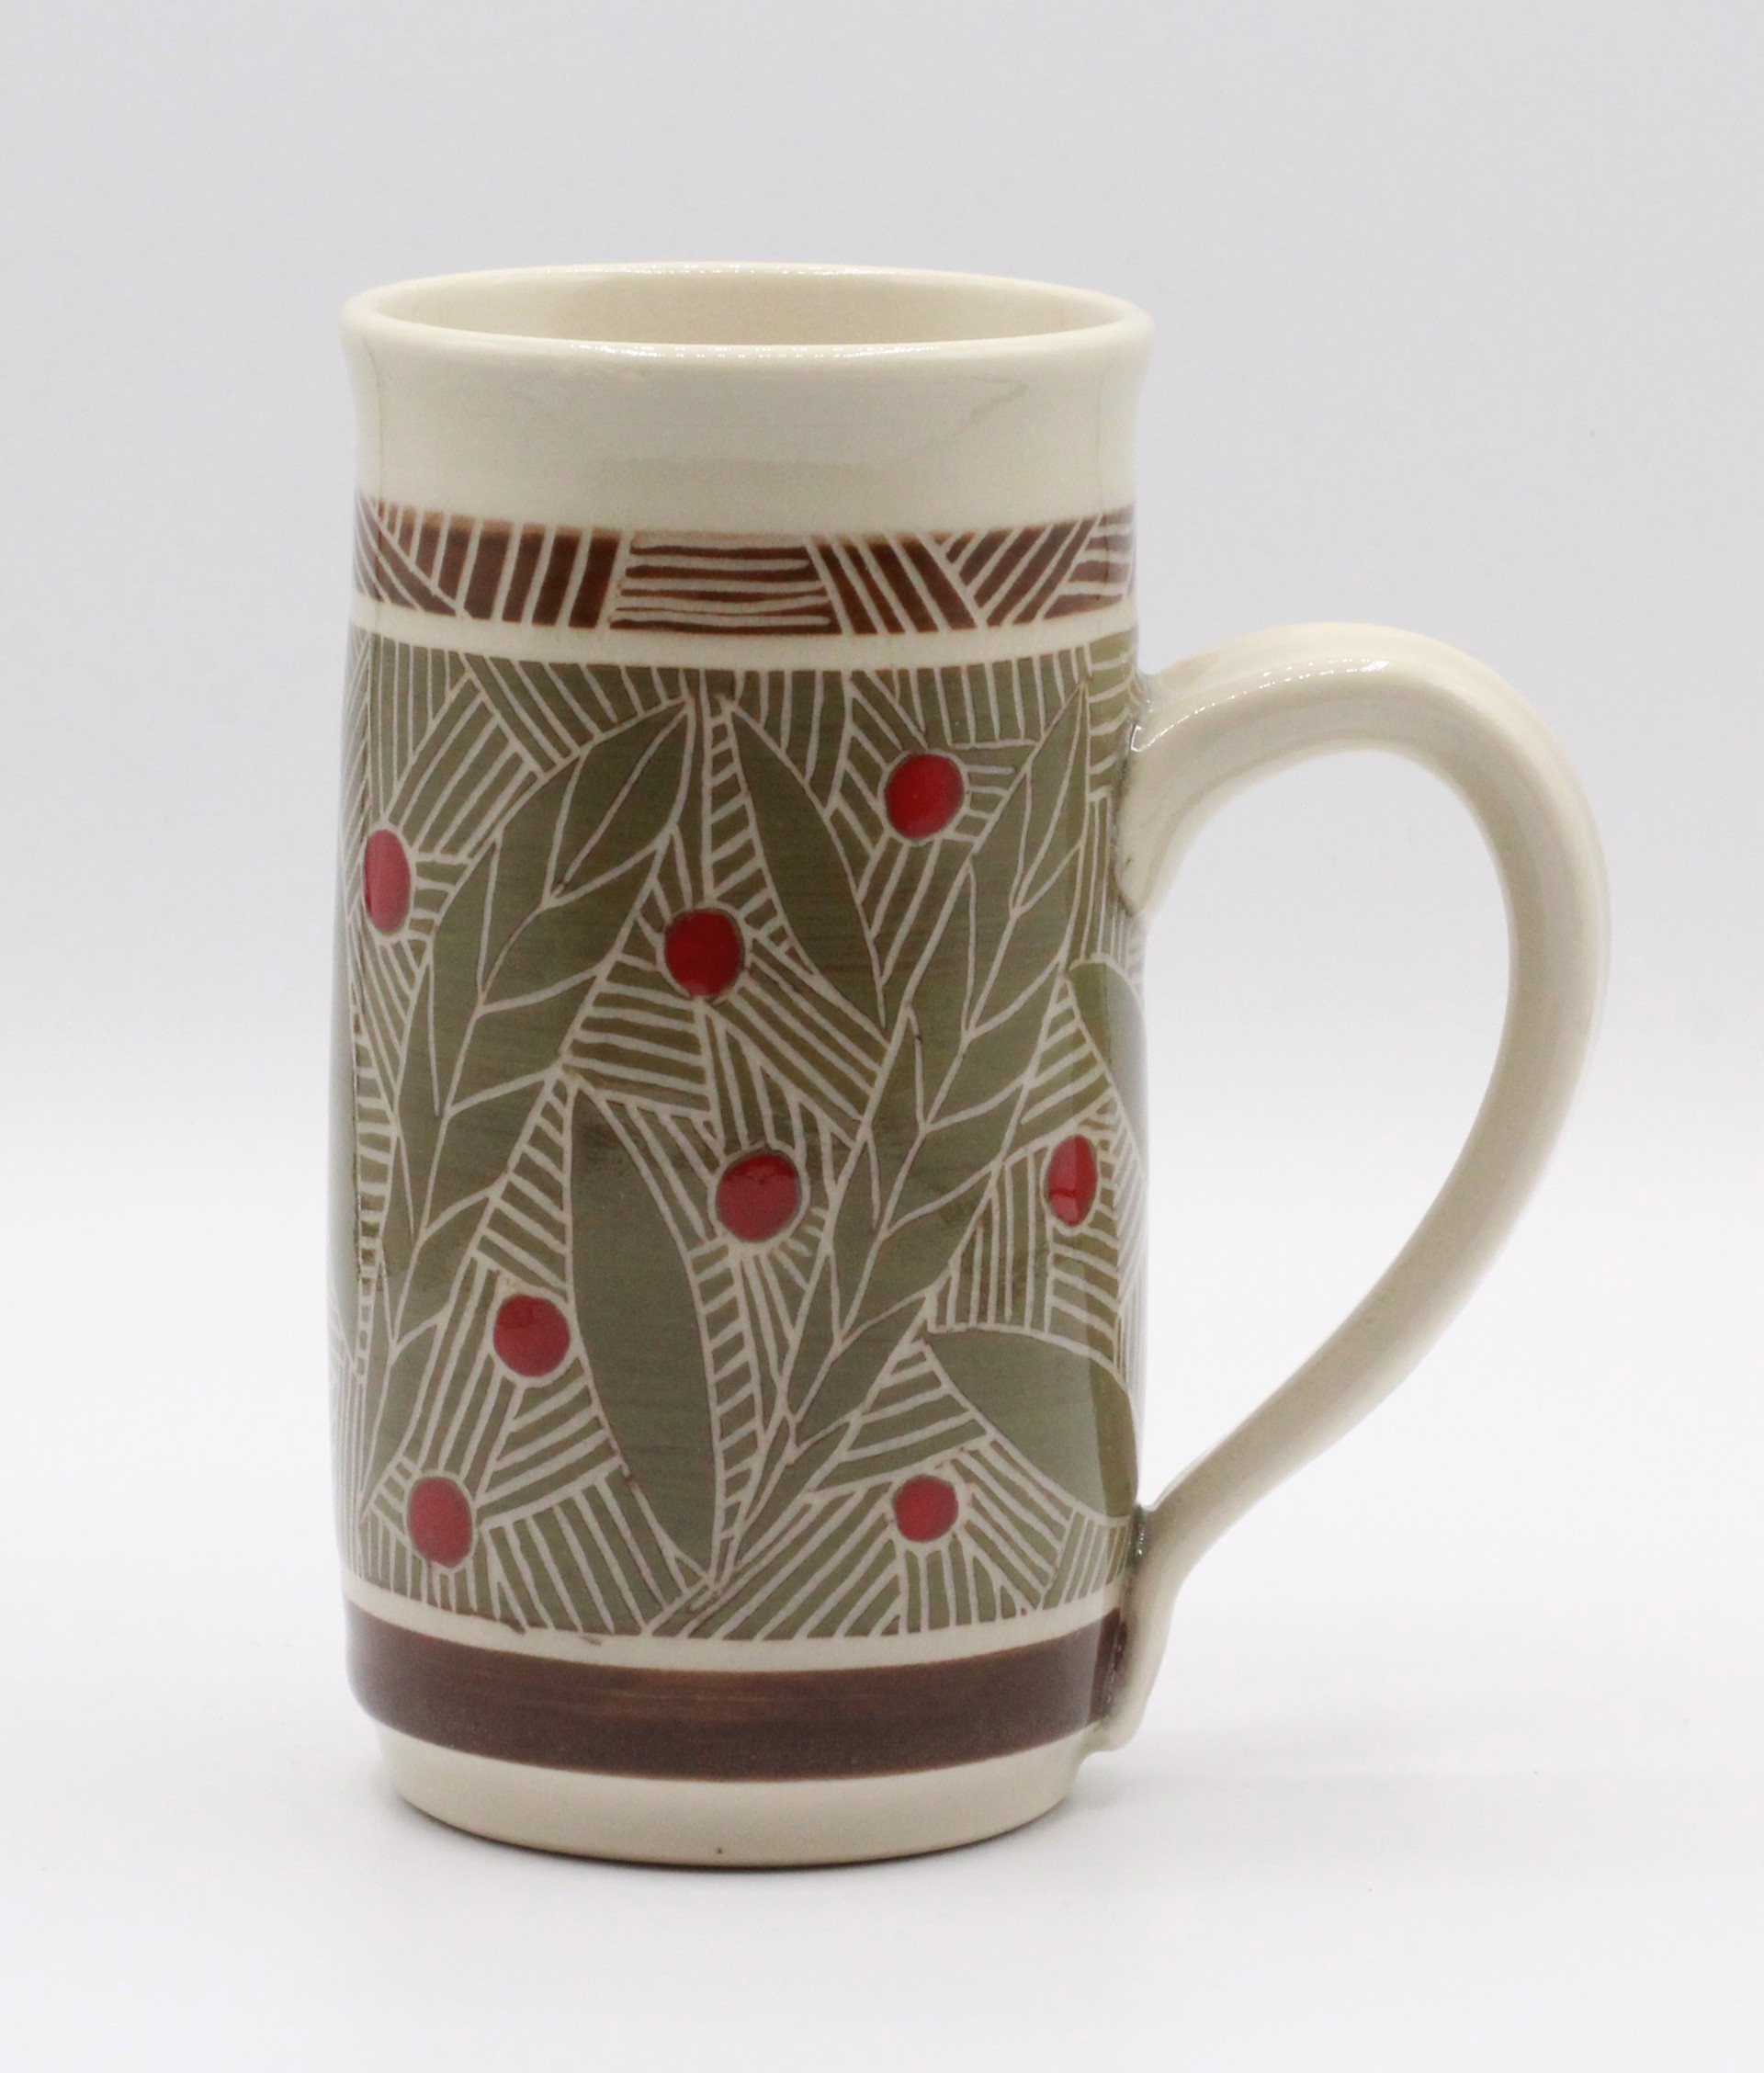 Tall Leaf and Berry Mug by Kelly Price